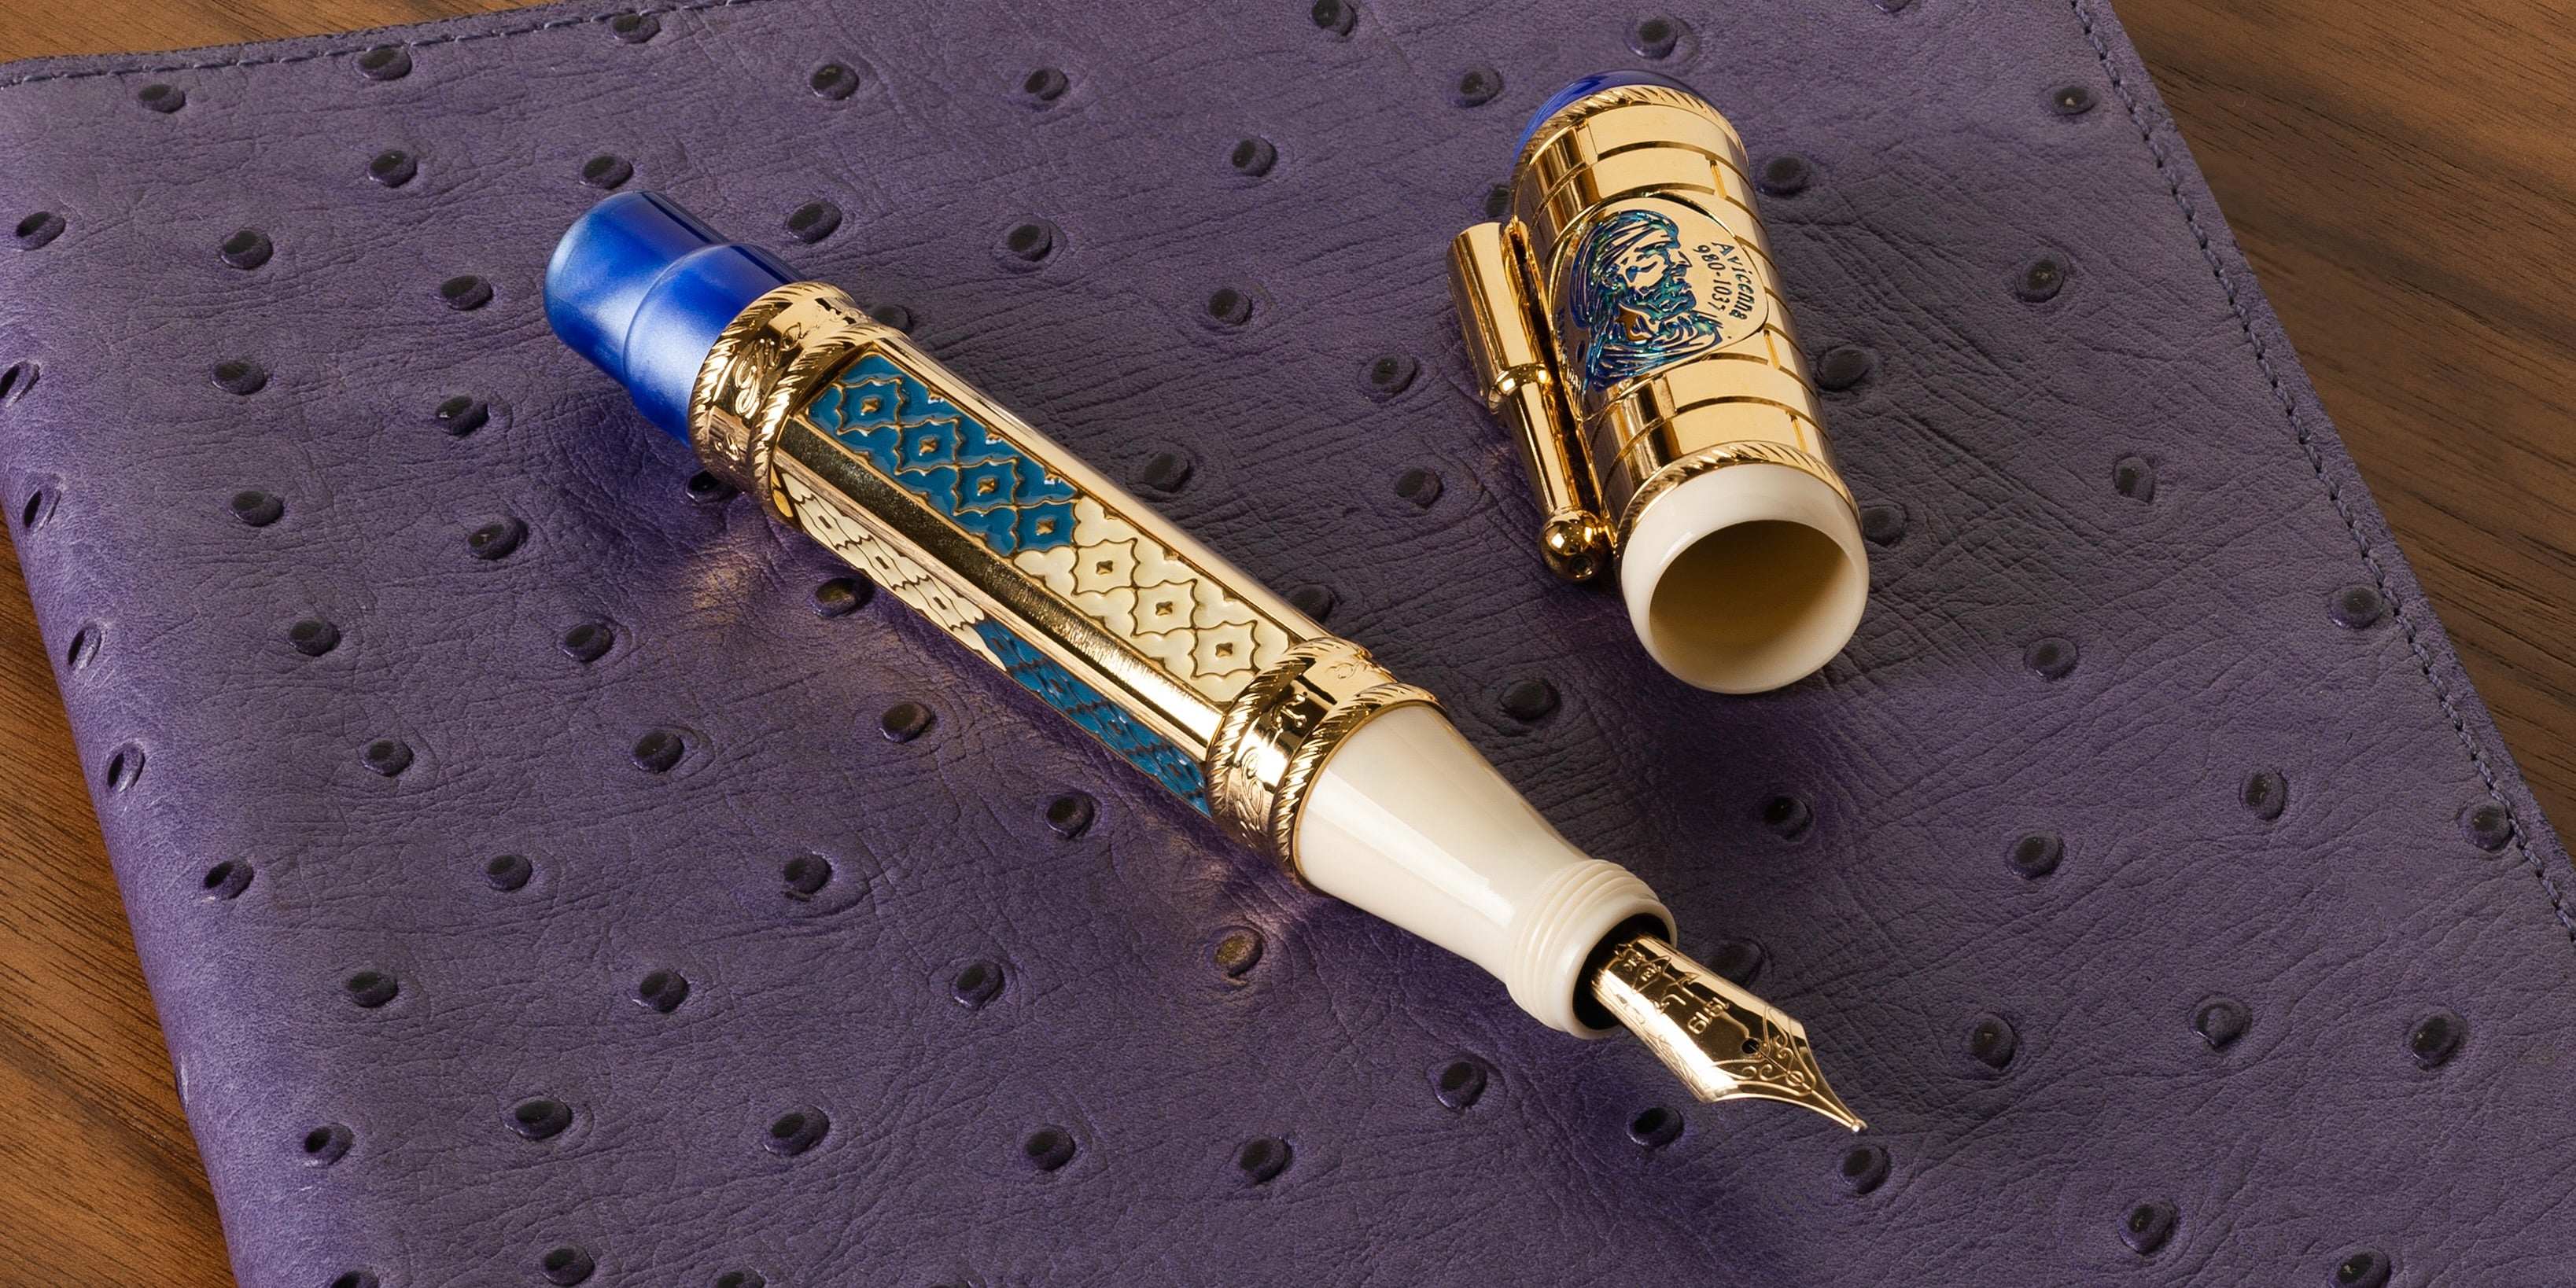 Avicenna Pen Collection: Celebration of Medical Workers Day